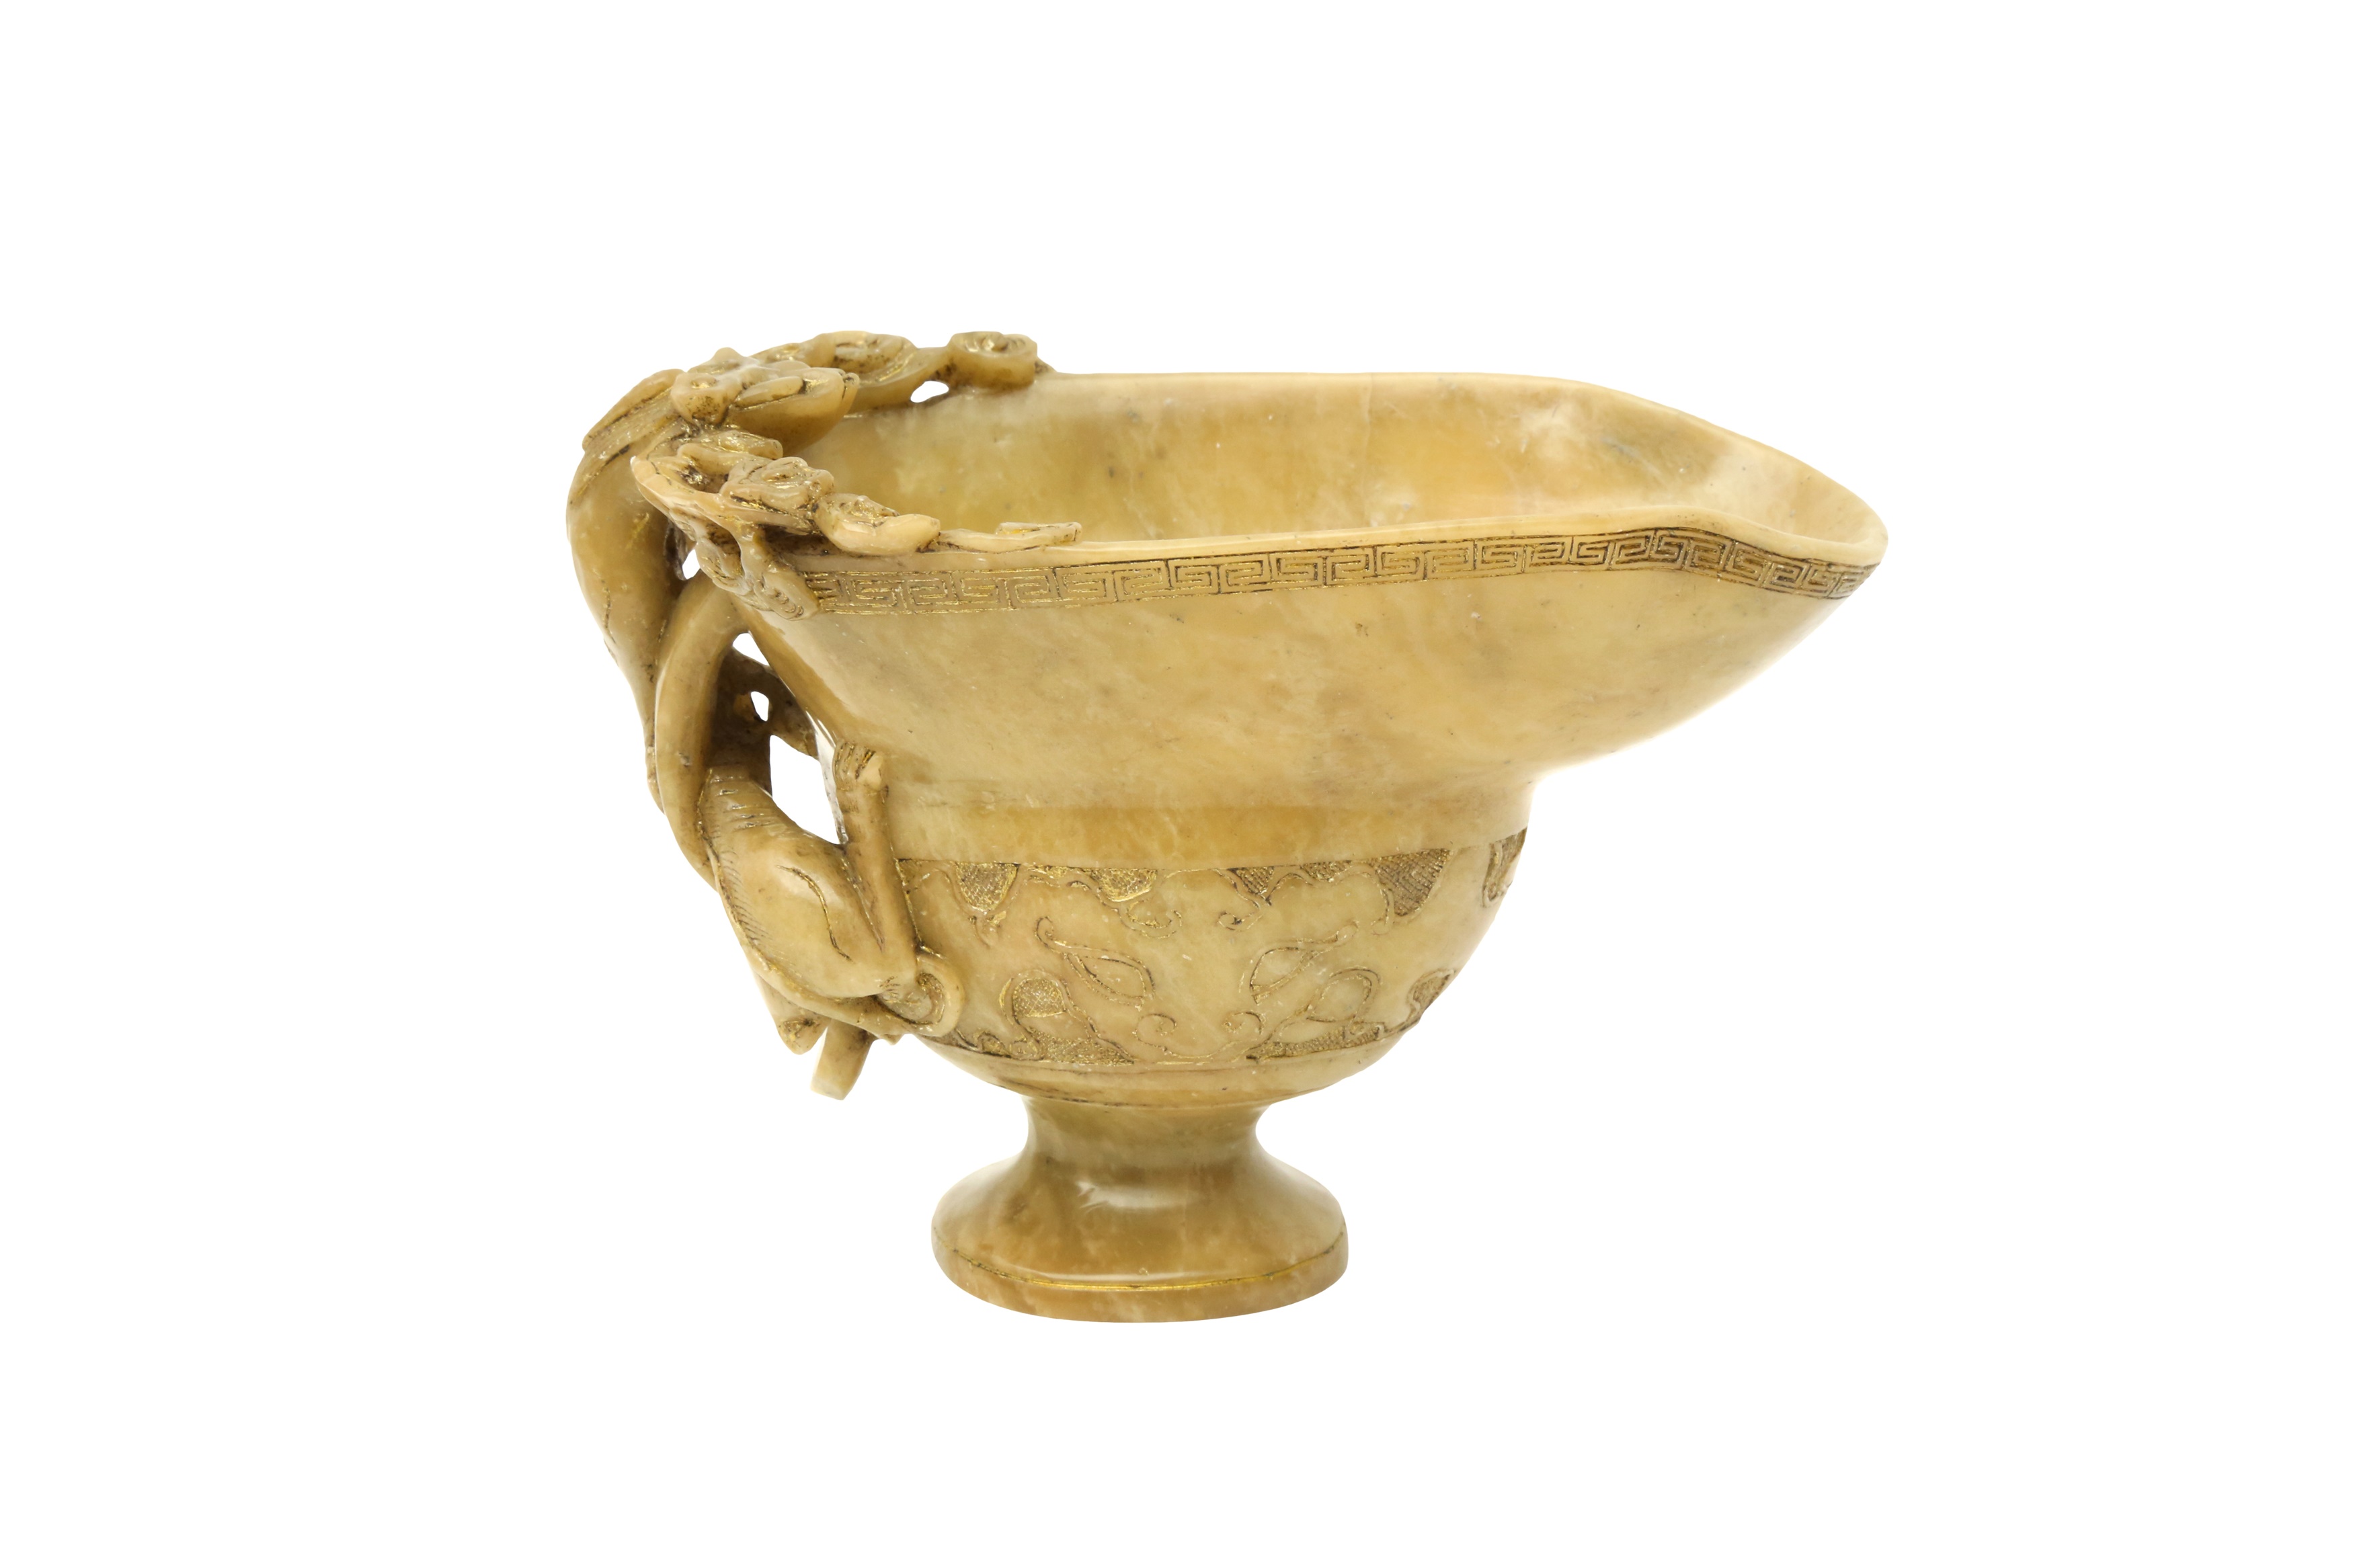 A CHINESE SOAPSTONE 'CHILONG' LIBATION CUP 十七或十八世紀 壽山石螭龍紋盃 - Image 2 of 11